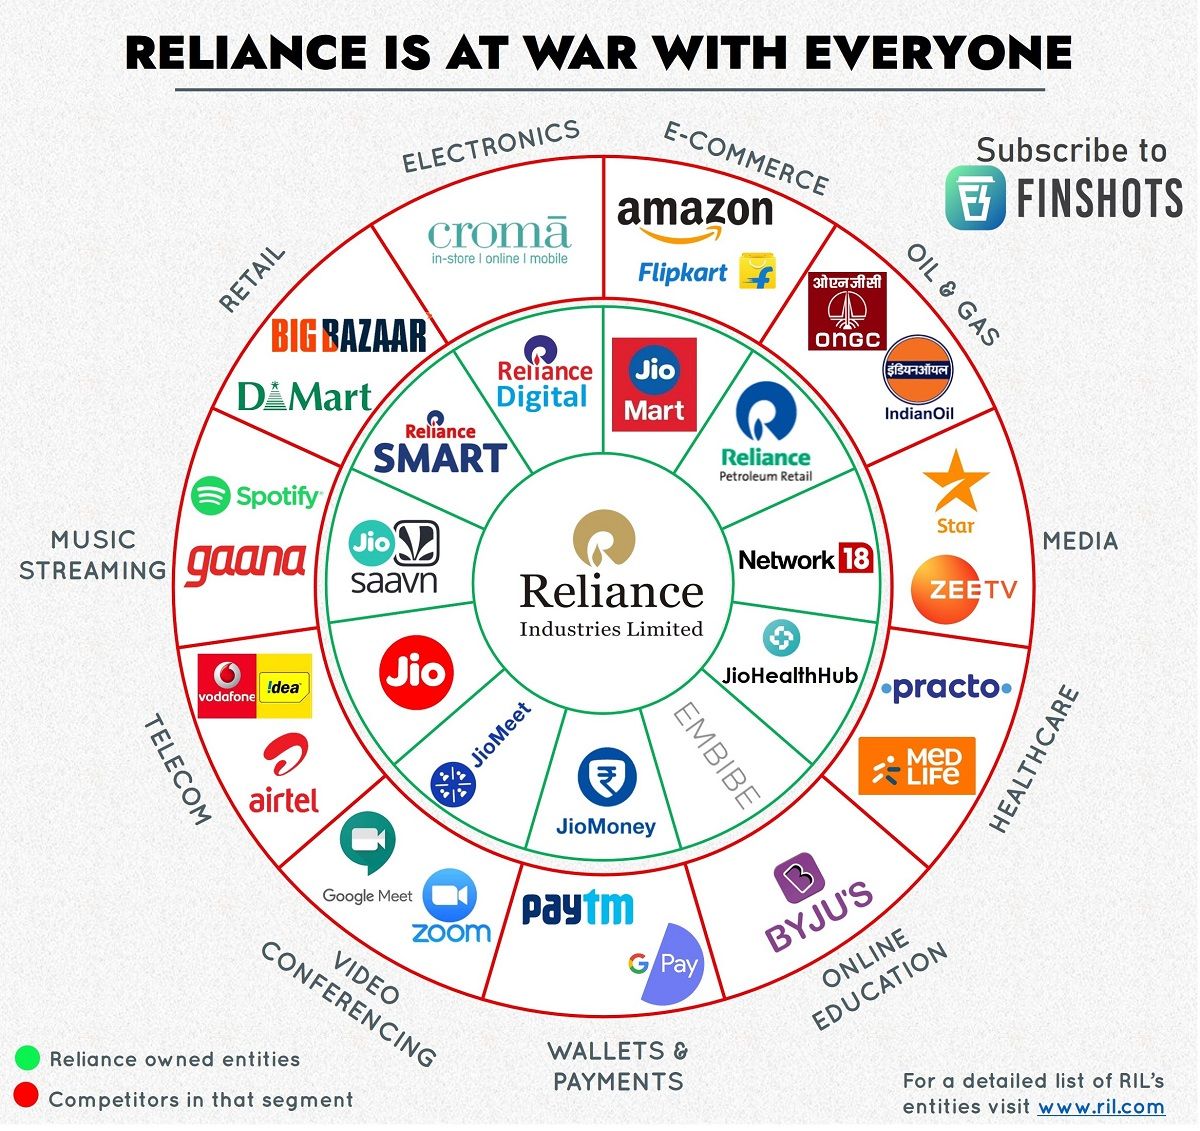 Reliance-is-at-war-with-everyone---1200-2.jpg